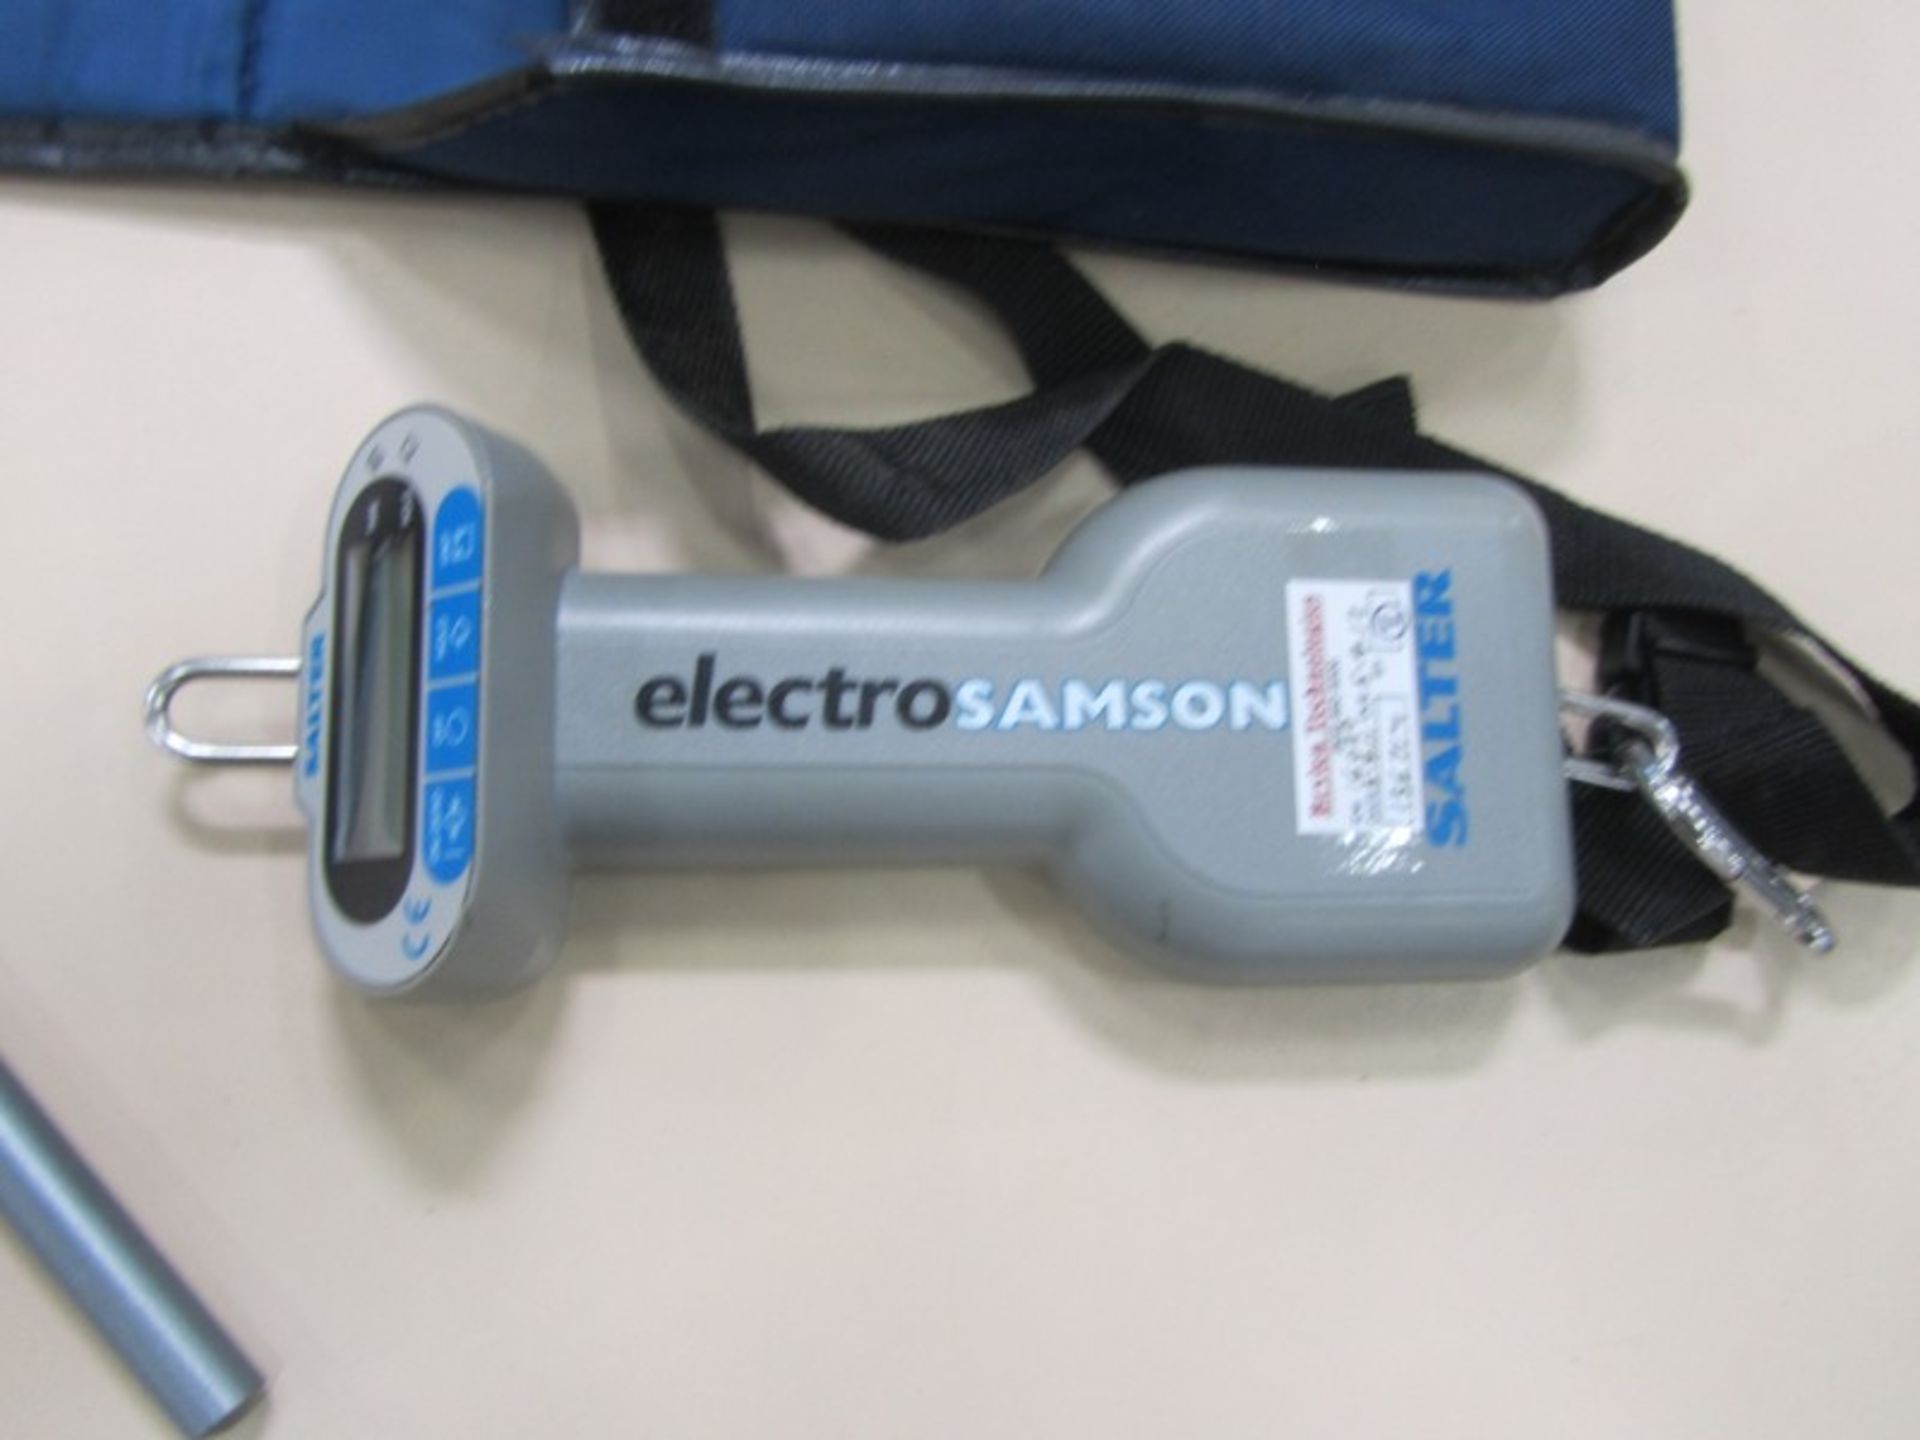 Salter Electro Samson Portable Digital Hanging Scale with case - Image 3 of 3